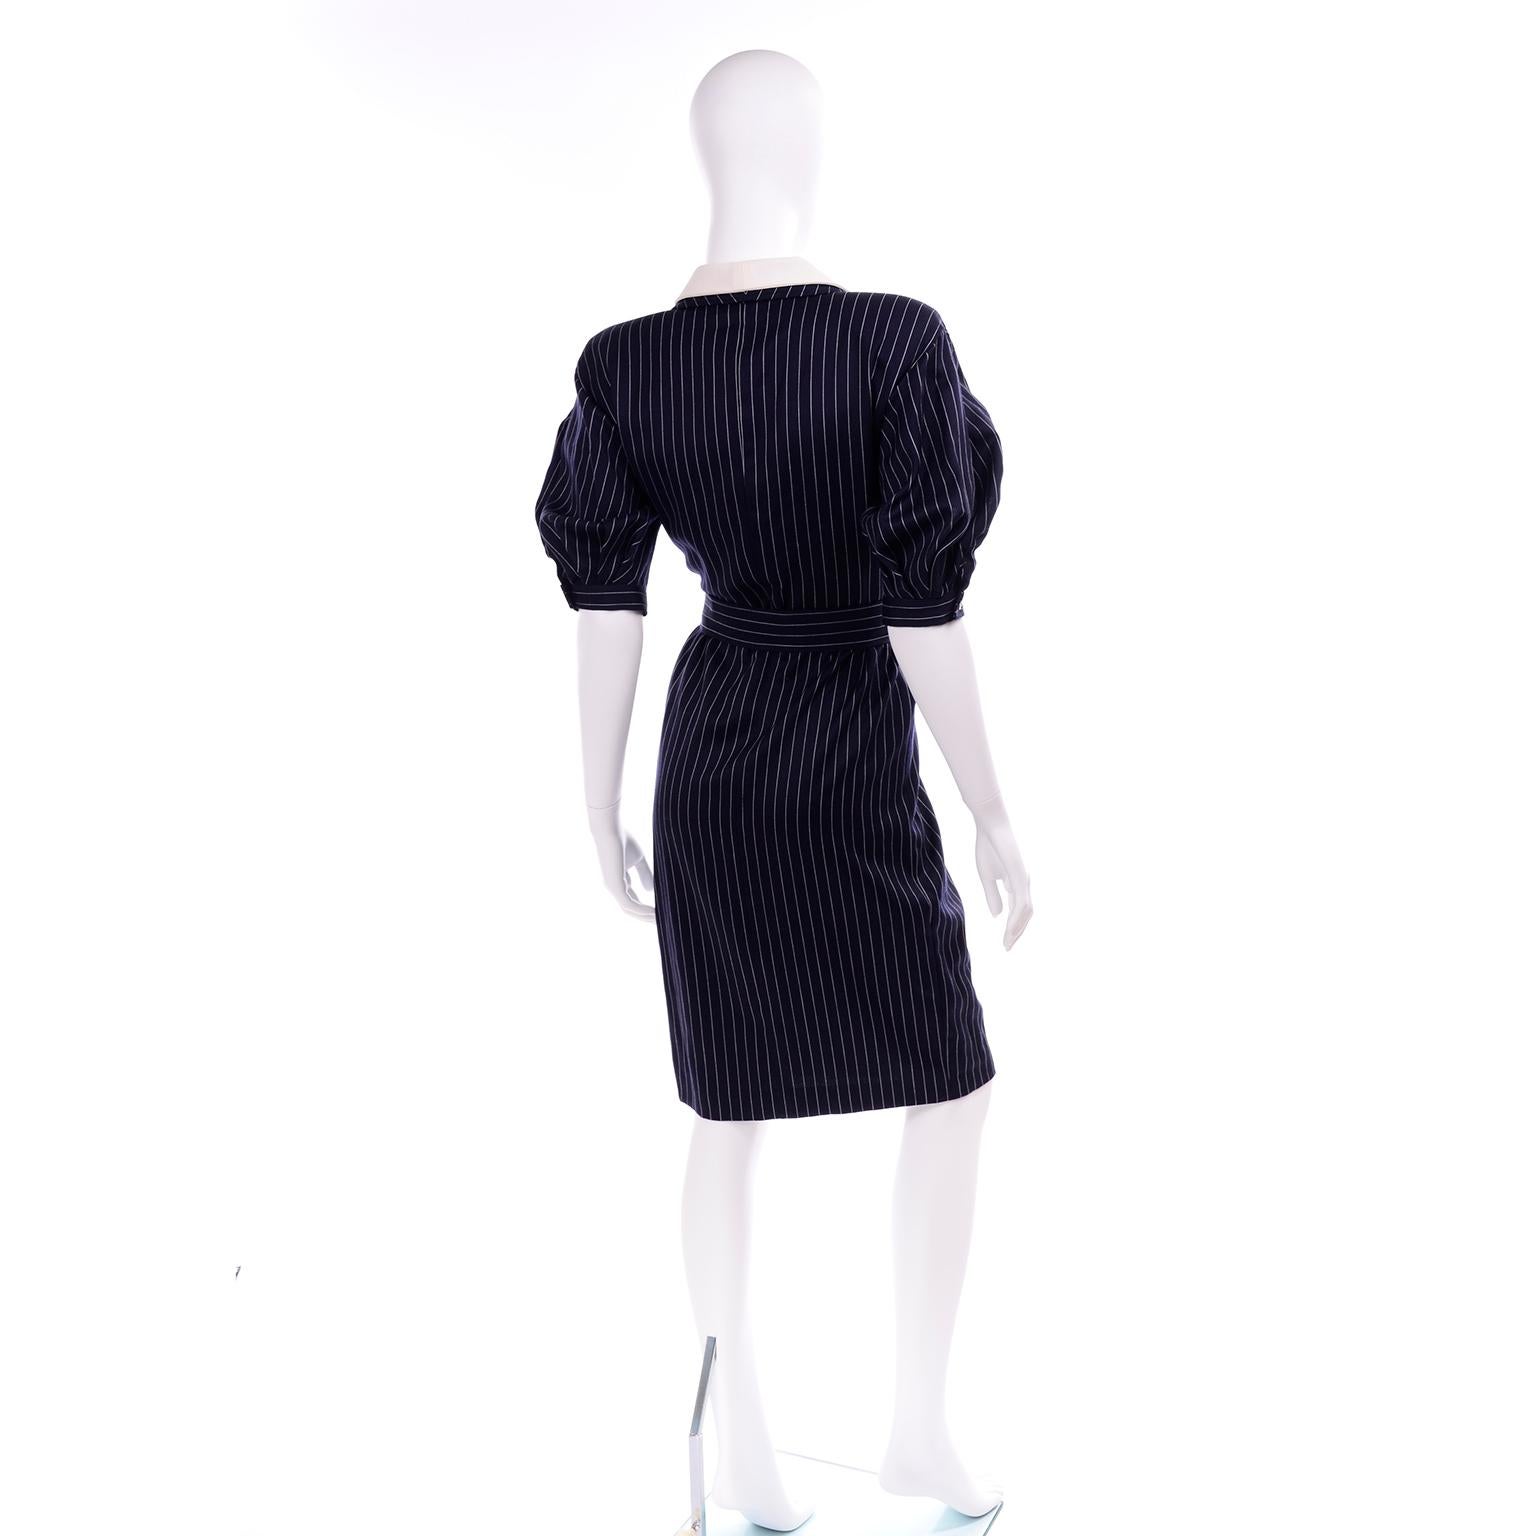 Women's New Ungaro Deadstock Vintage Dress in Navy Blue & White Pinstripes With Tag